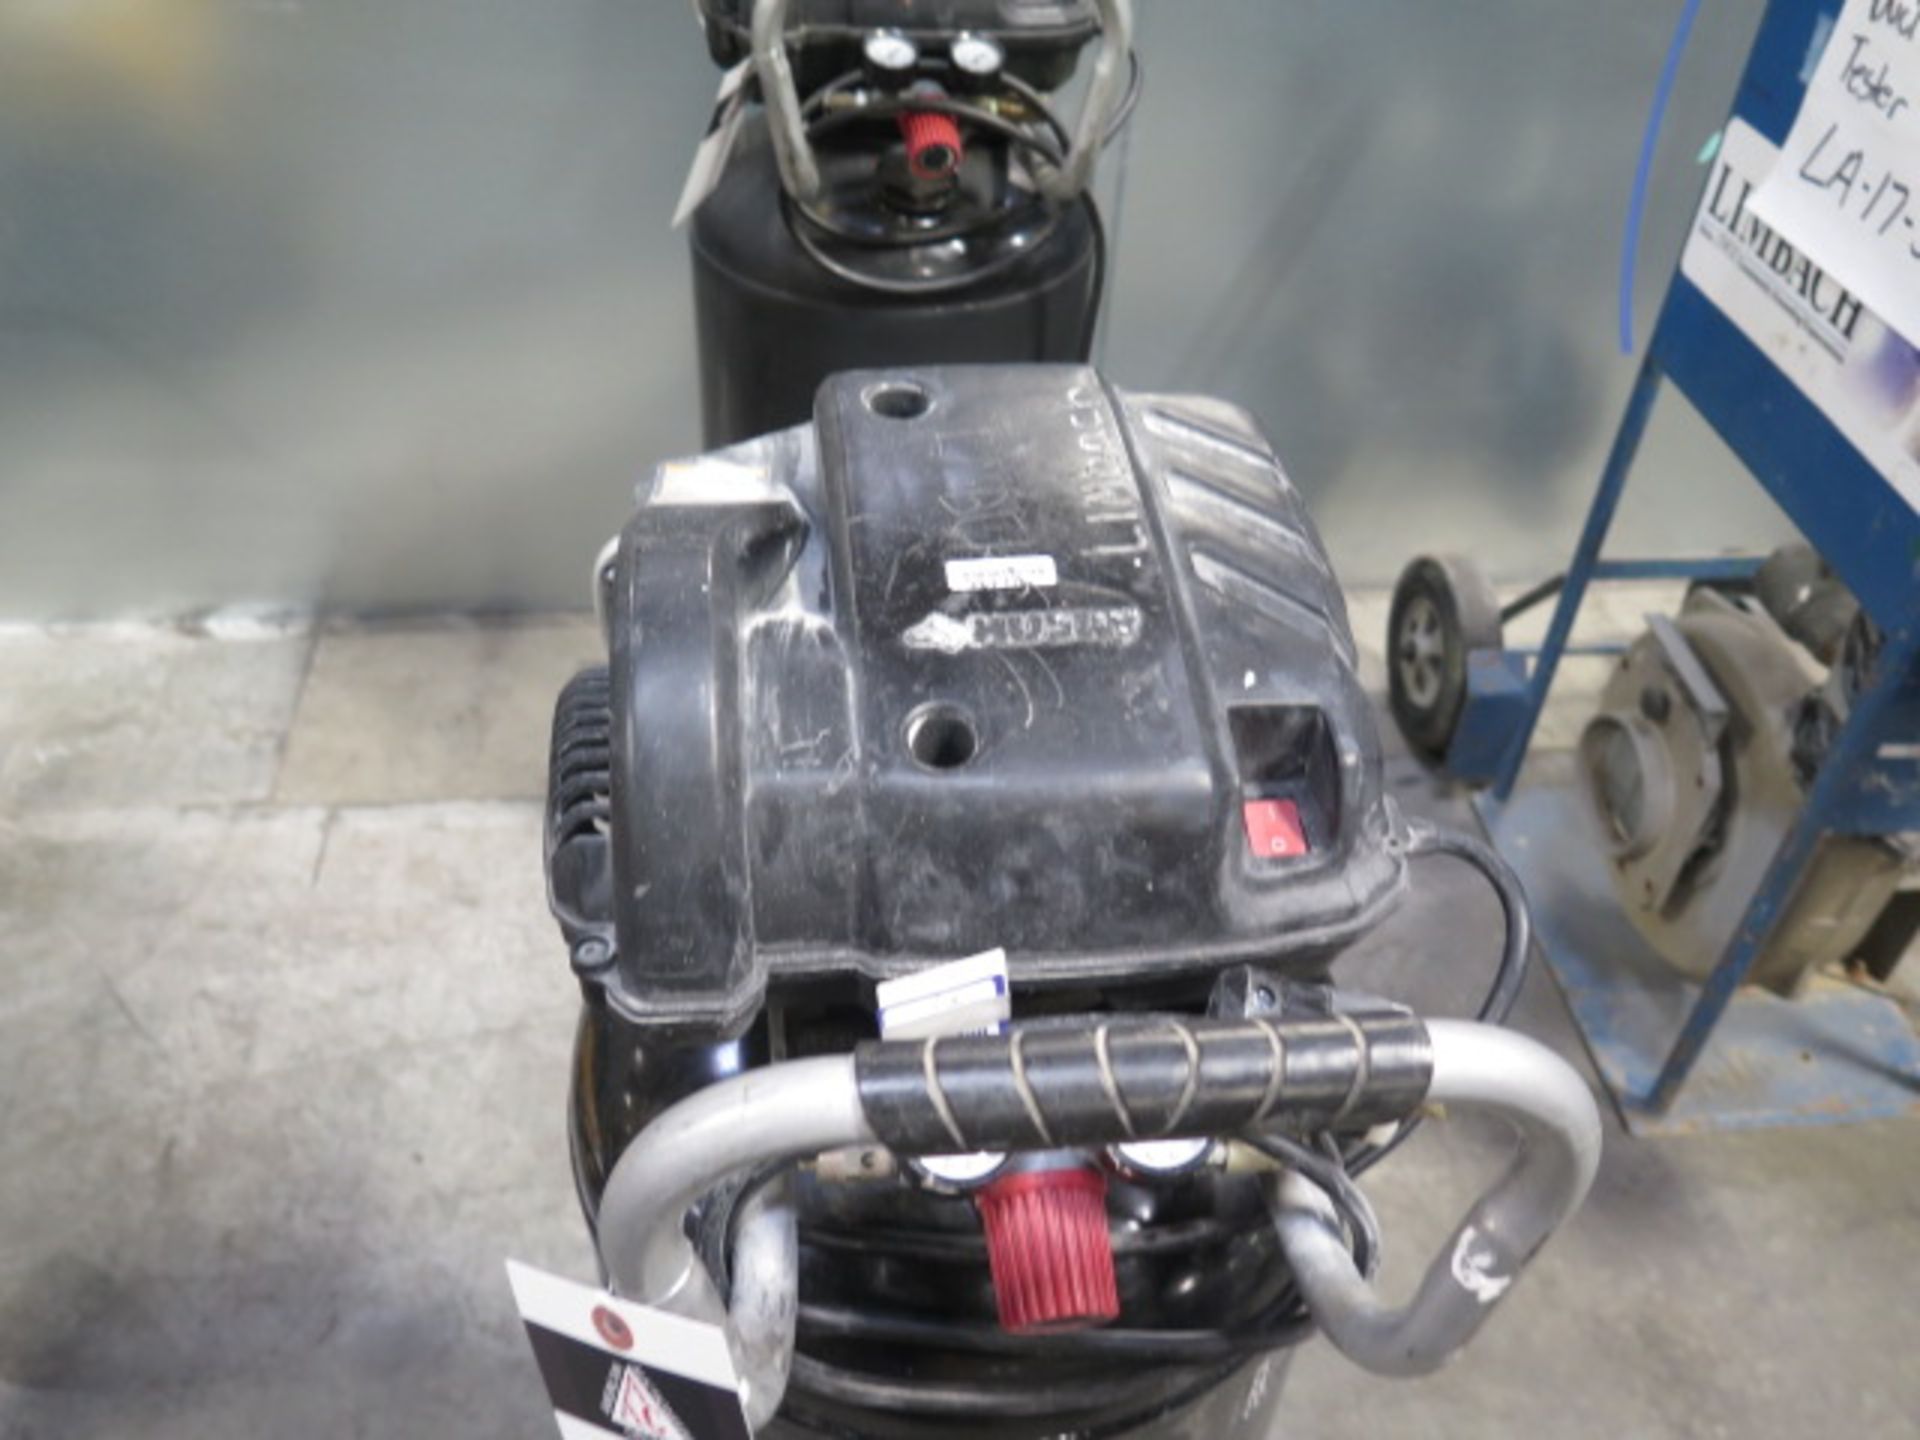 Husky C201GH Portable Air Compressor w/ 20 Gallon Tank (SOLD AS-IS - NO WARRANTY) - Image 3 of 5